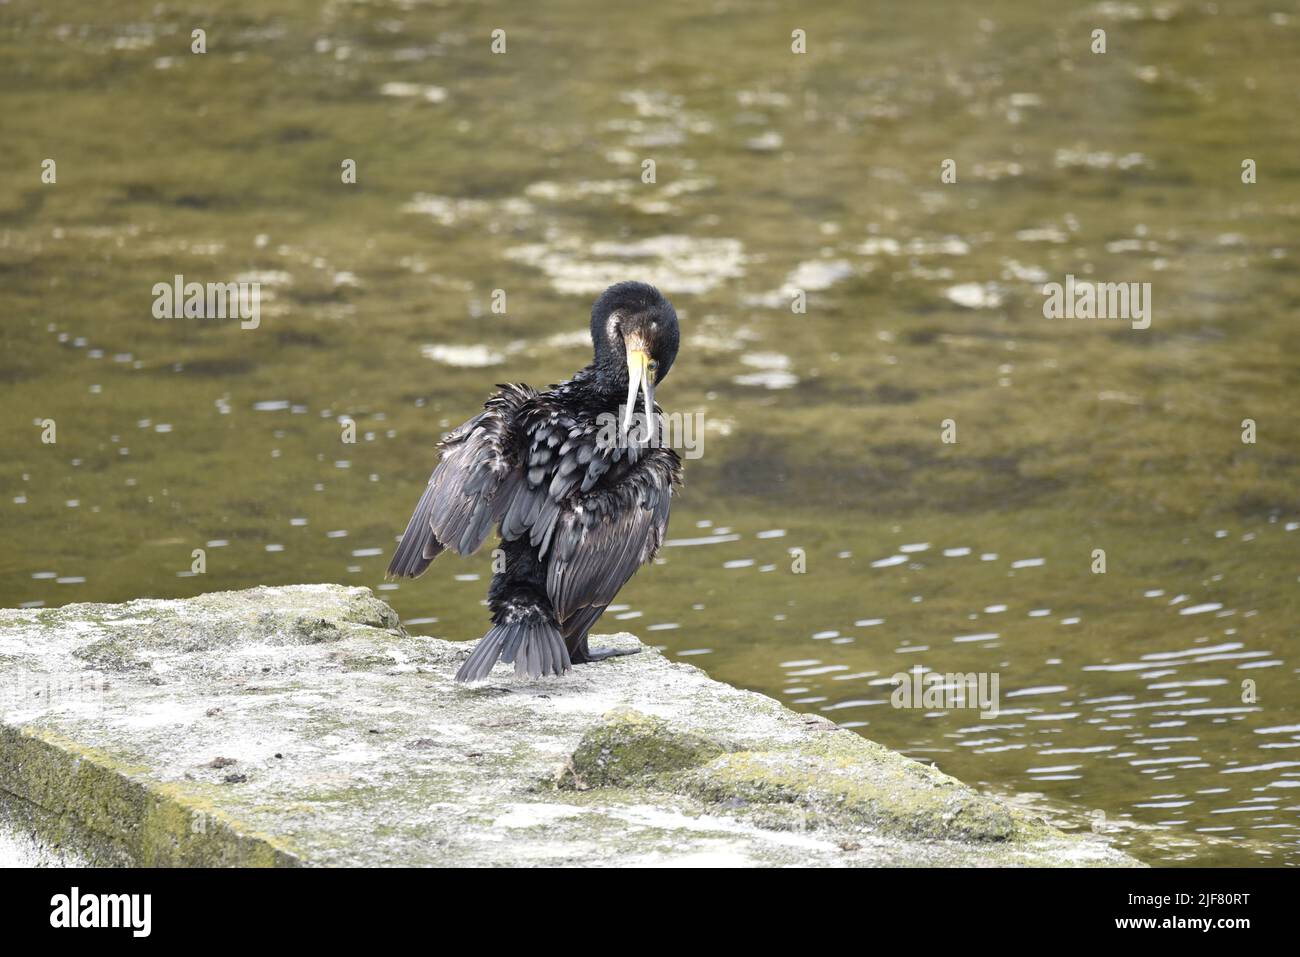 Close-Up Image of a Great Cormorant (Phalacrocorax carbo) Preening, with Head Facing Camera, Beak Open and Part-Open Wings on a Sunny Day in the UK Stock Photo